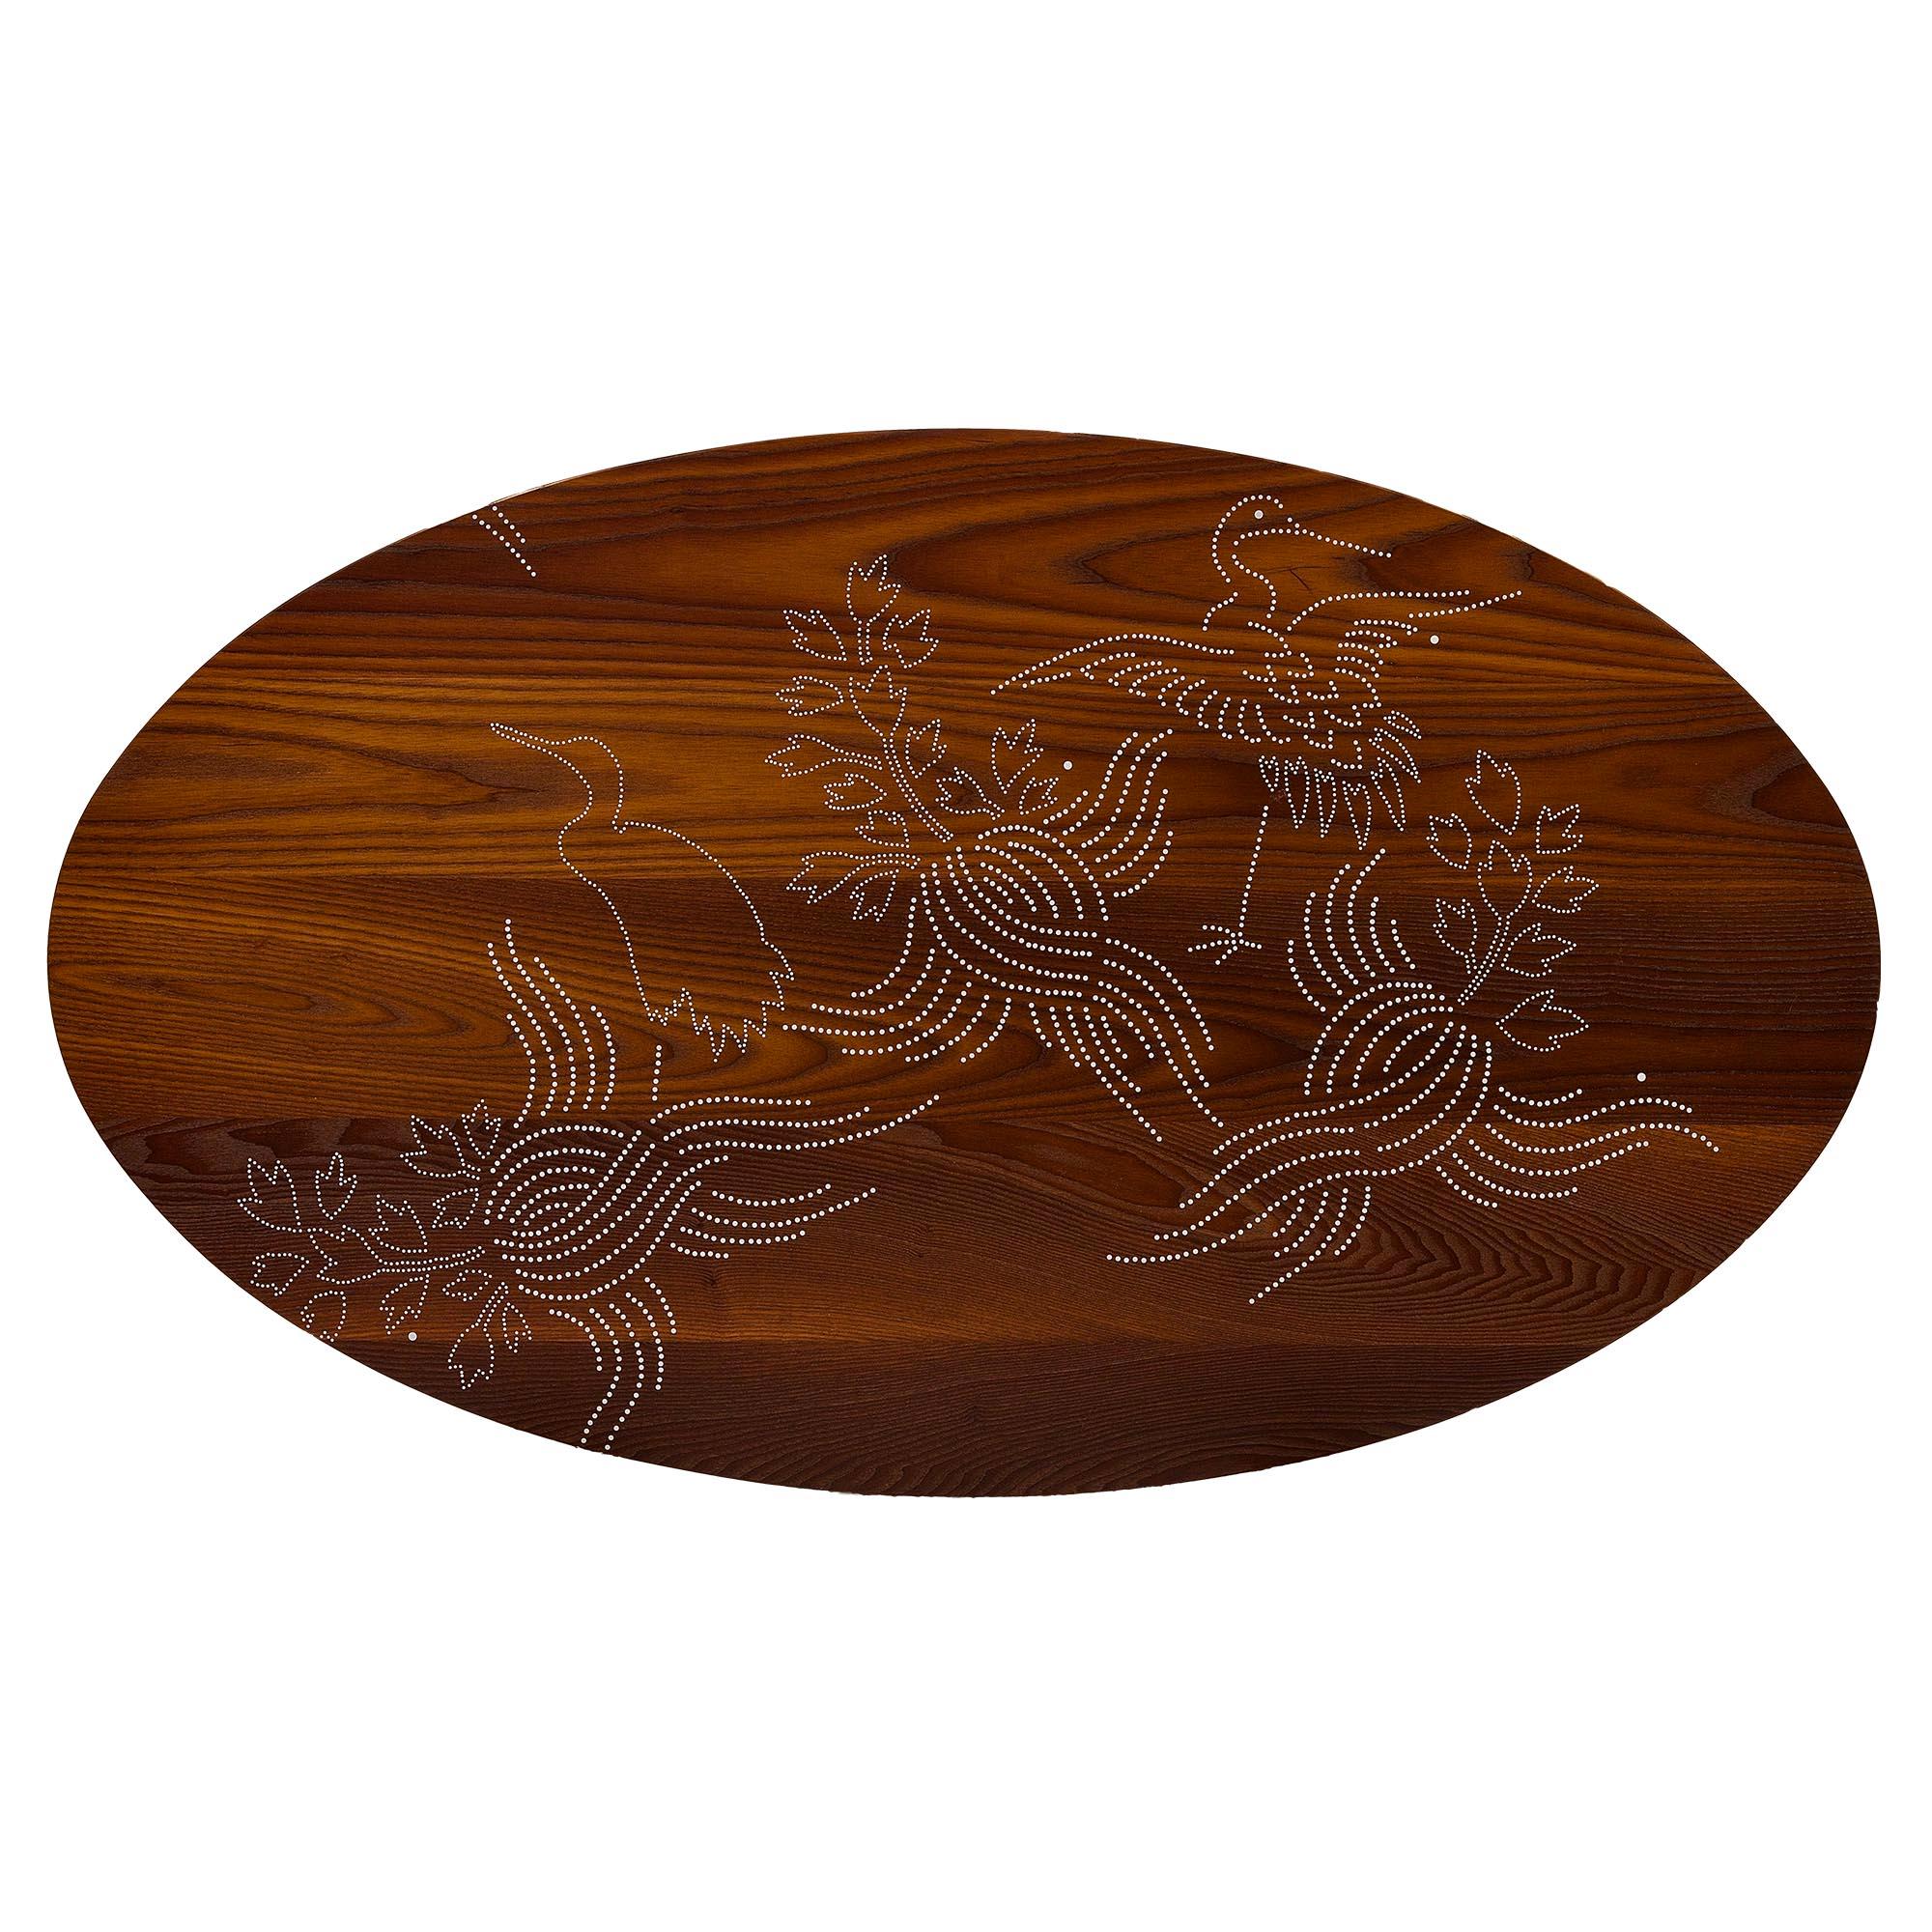 Modern contemporary nail inlay coffee table no. 21 by Peter Sandback. 
Brown maple, nails
Measures: 28